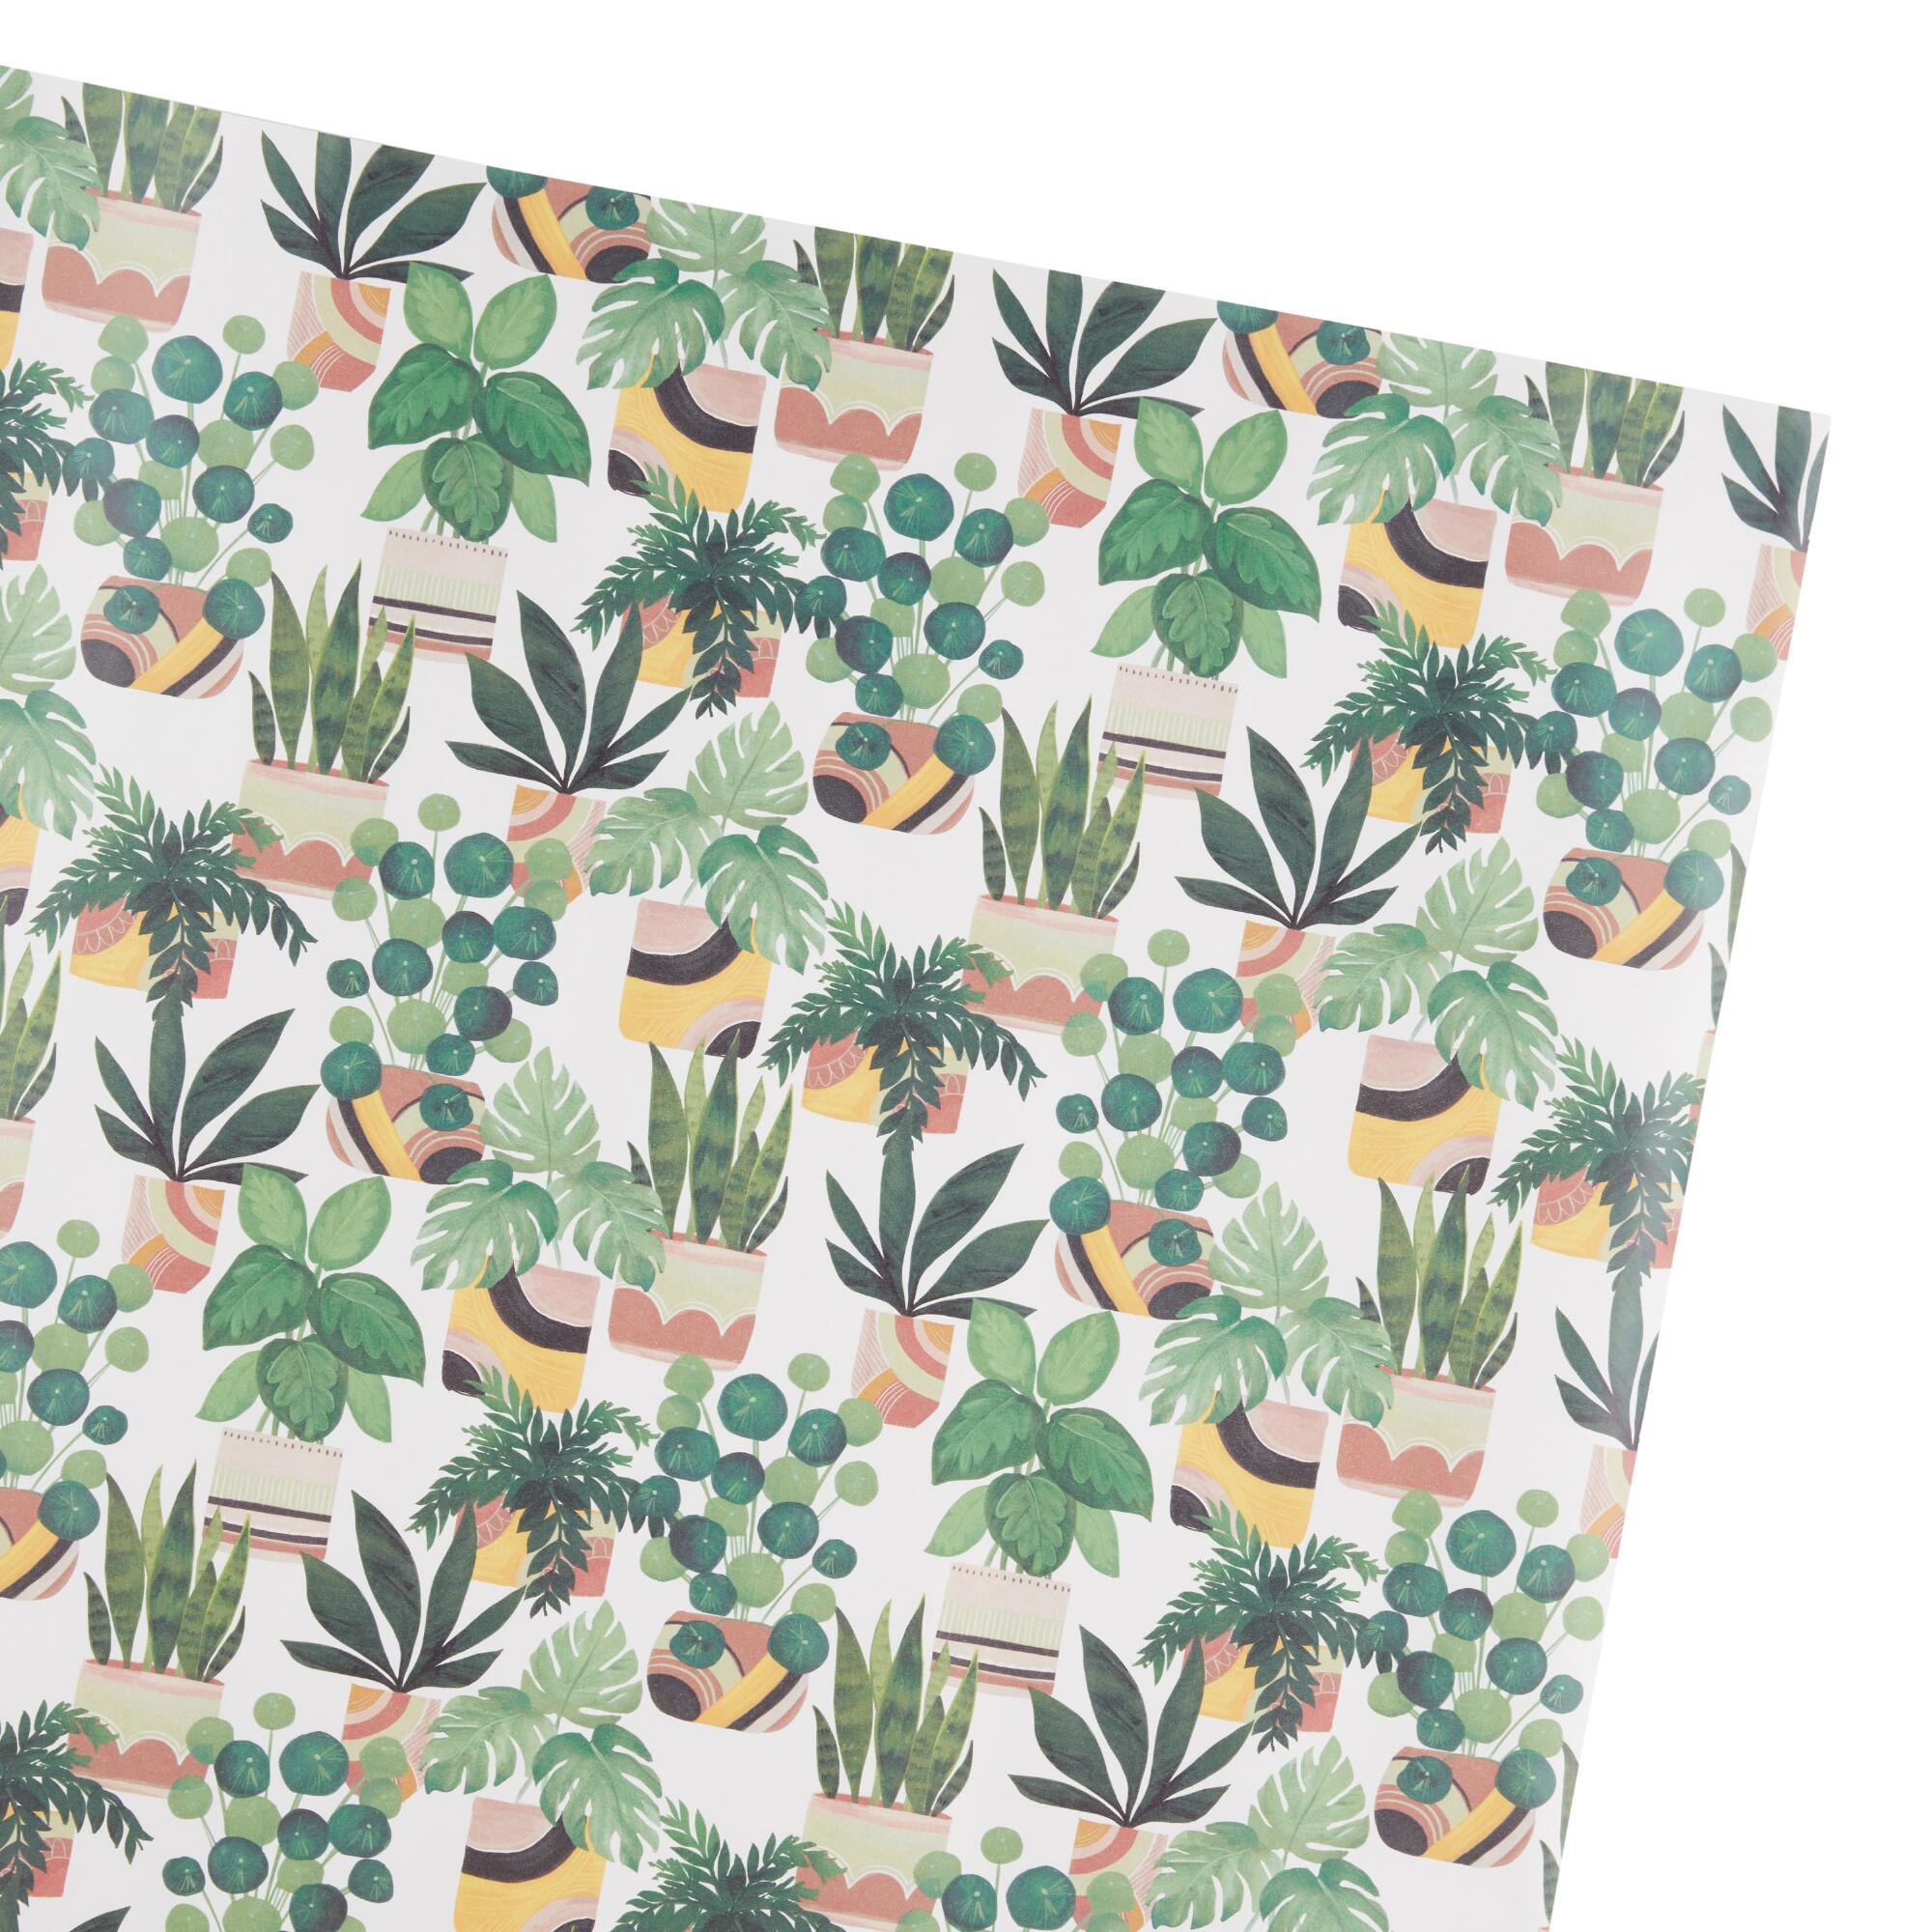 Potted Plants Recycled Kraft Wrapping Paper Roll by World Market